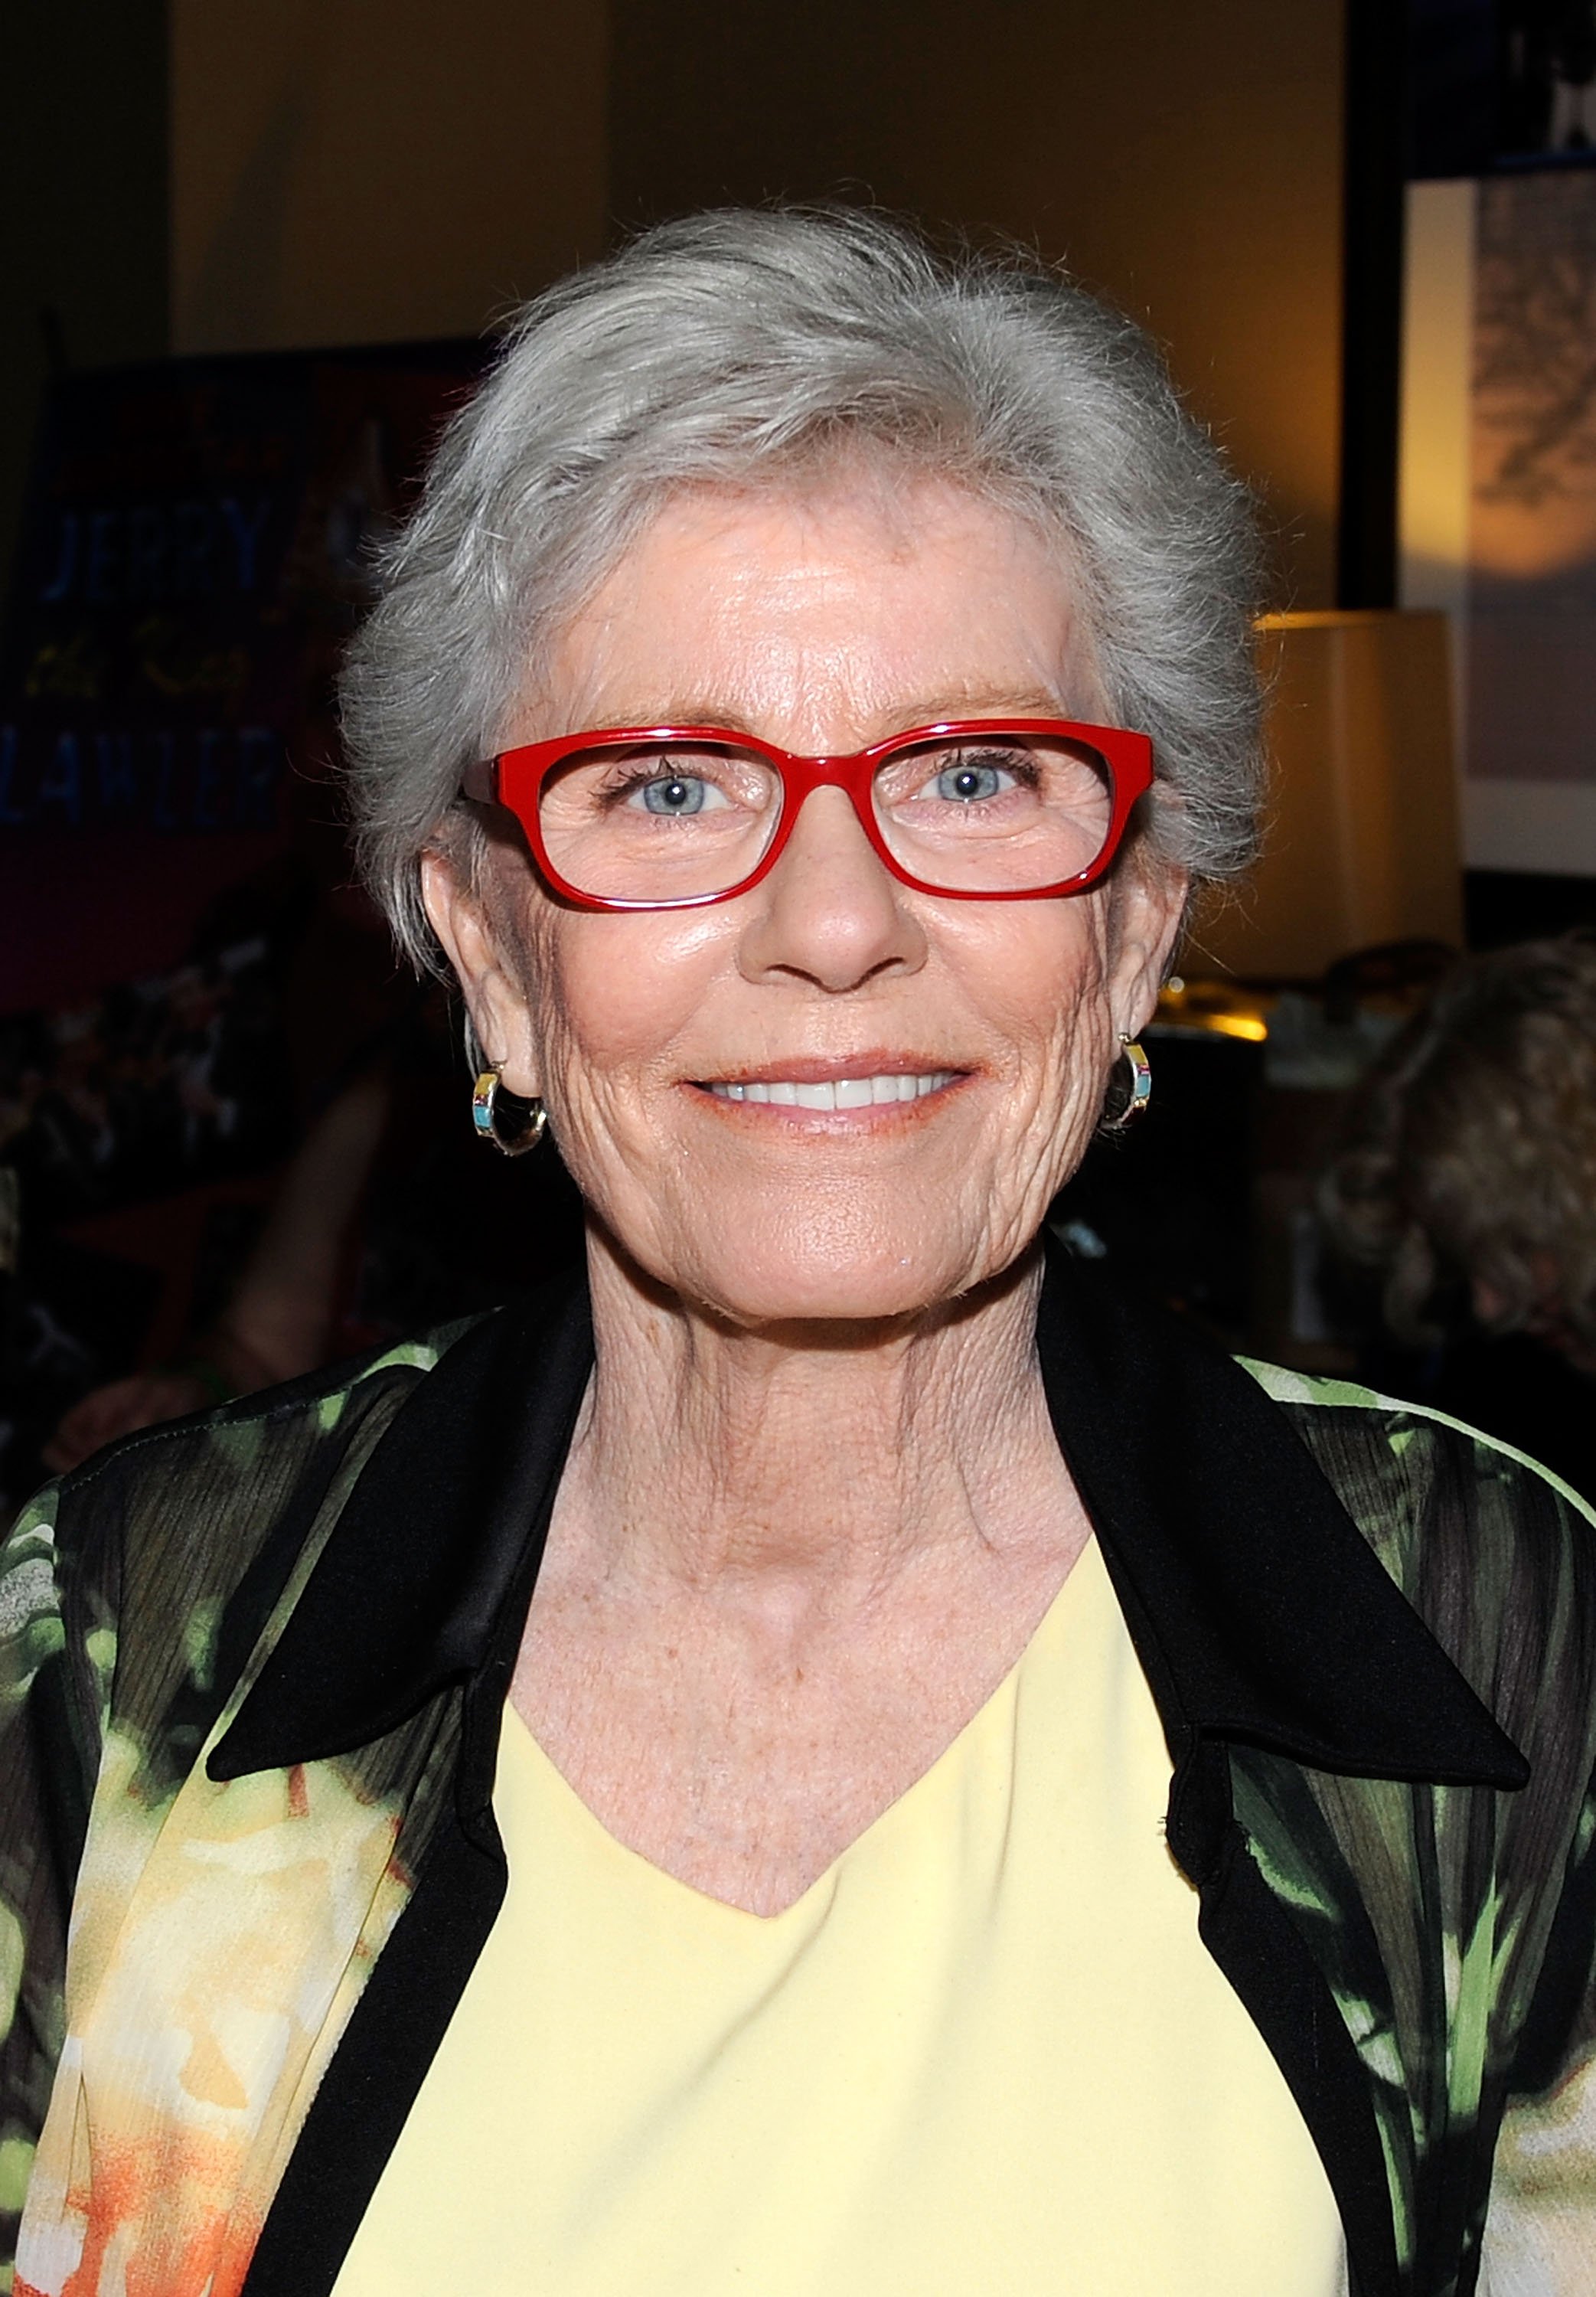 Patty Duke attends the 2013 Chiller Theatre Expo at Sheraton Parsippany Hotel on April 26, 2013 in Parsippany, New Jersey. | Source: Getty Images